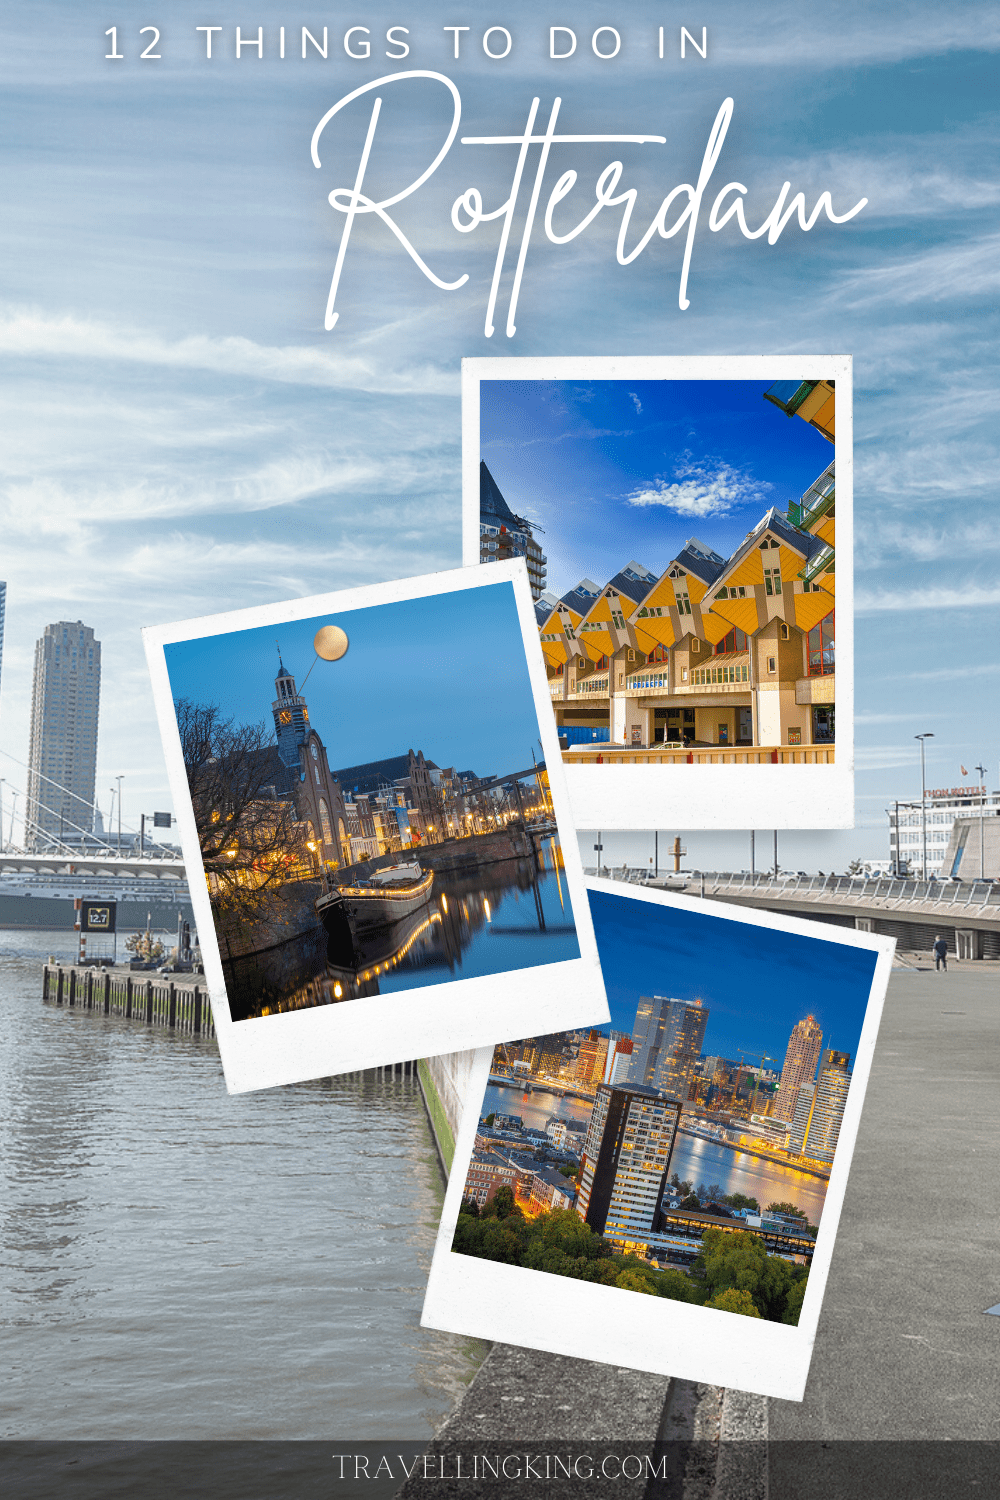 12 things to do in Rotterdam